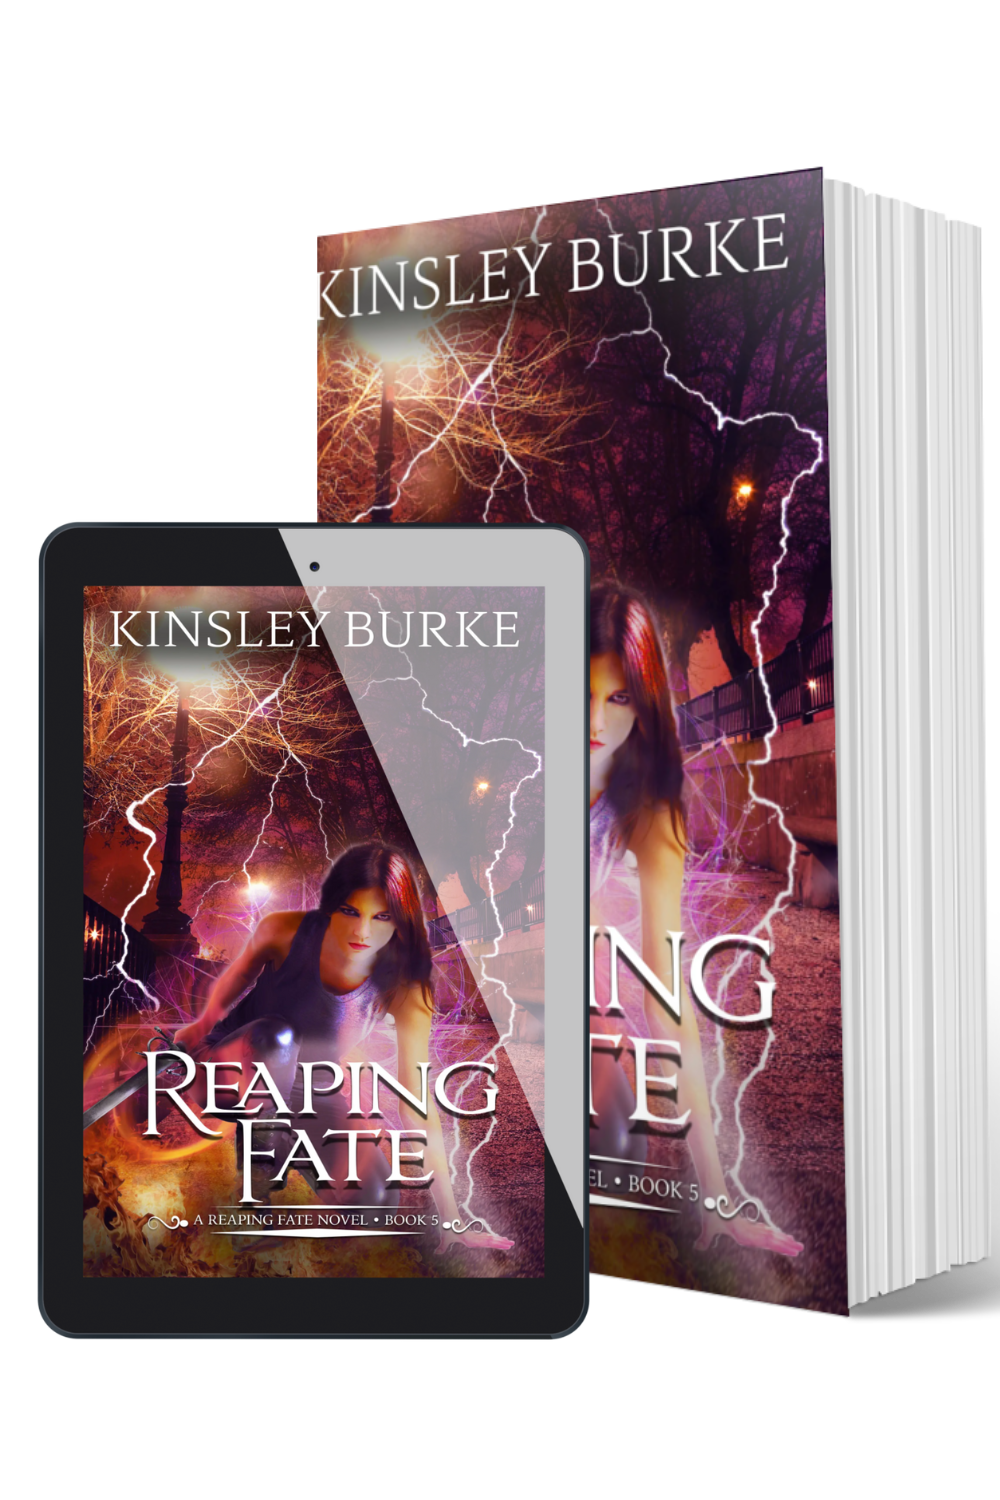 Cover image of Reaping Fate by Kinsley Burke